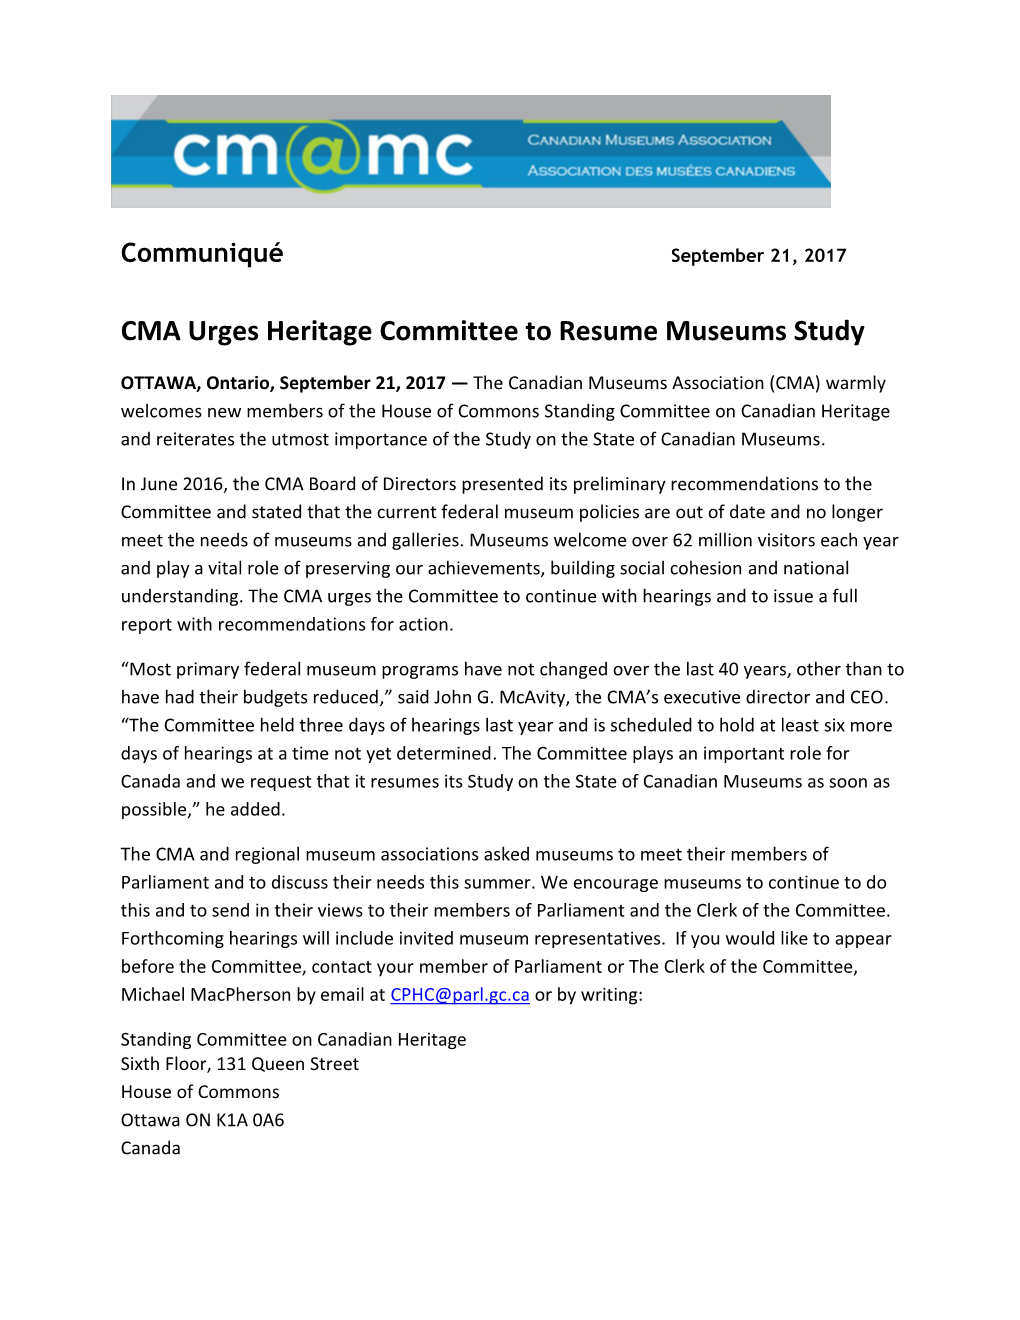 CMA Urges Heritage Committee to Resume Museums Study